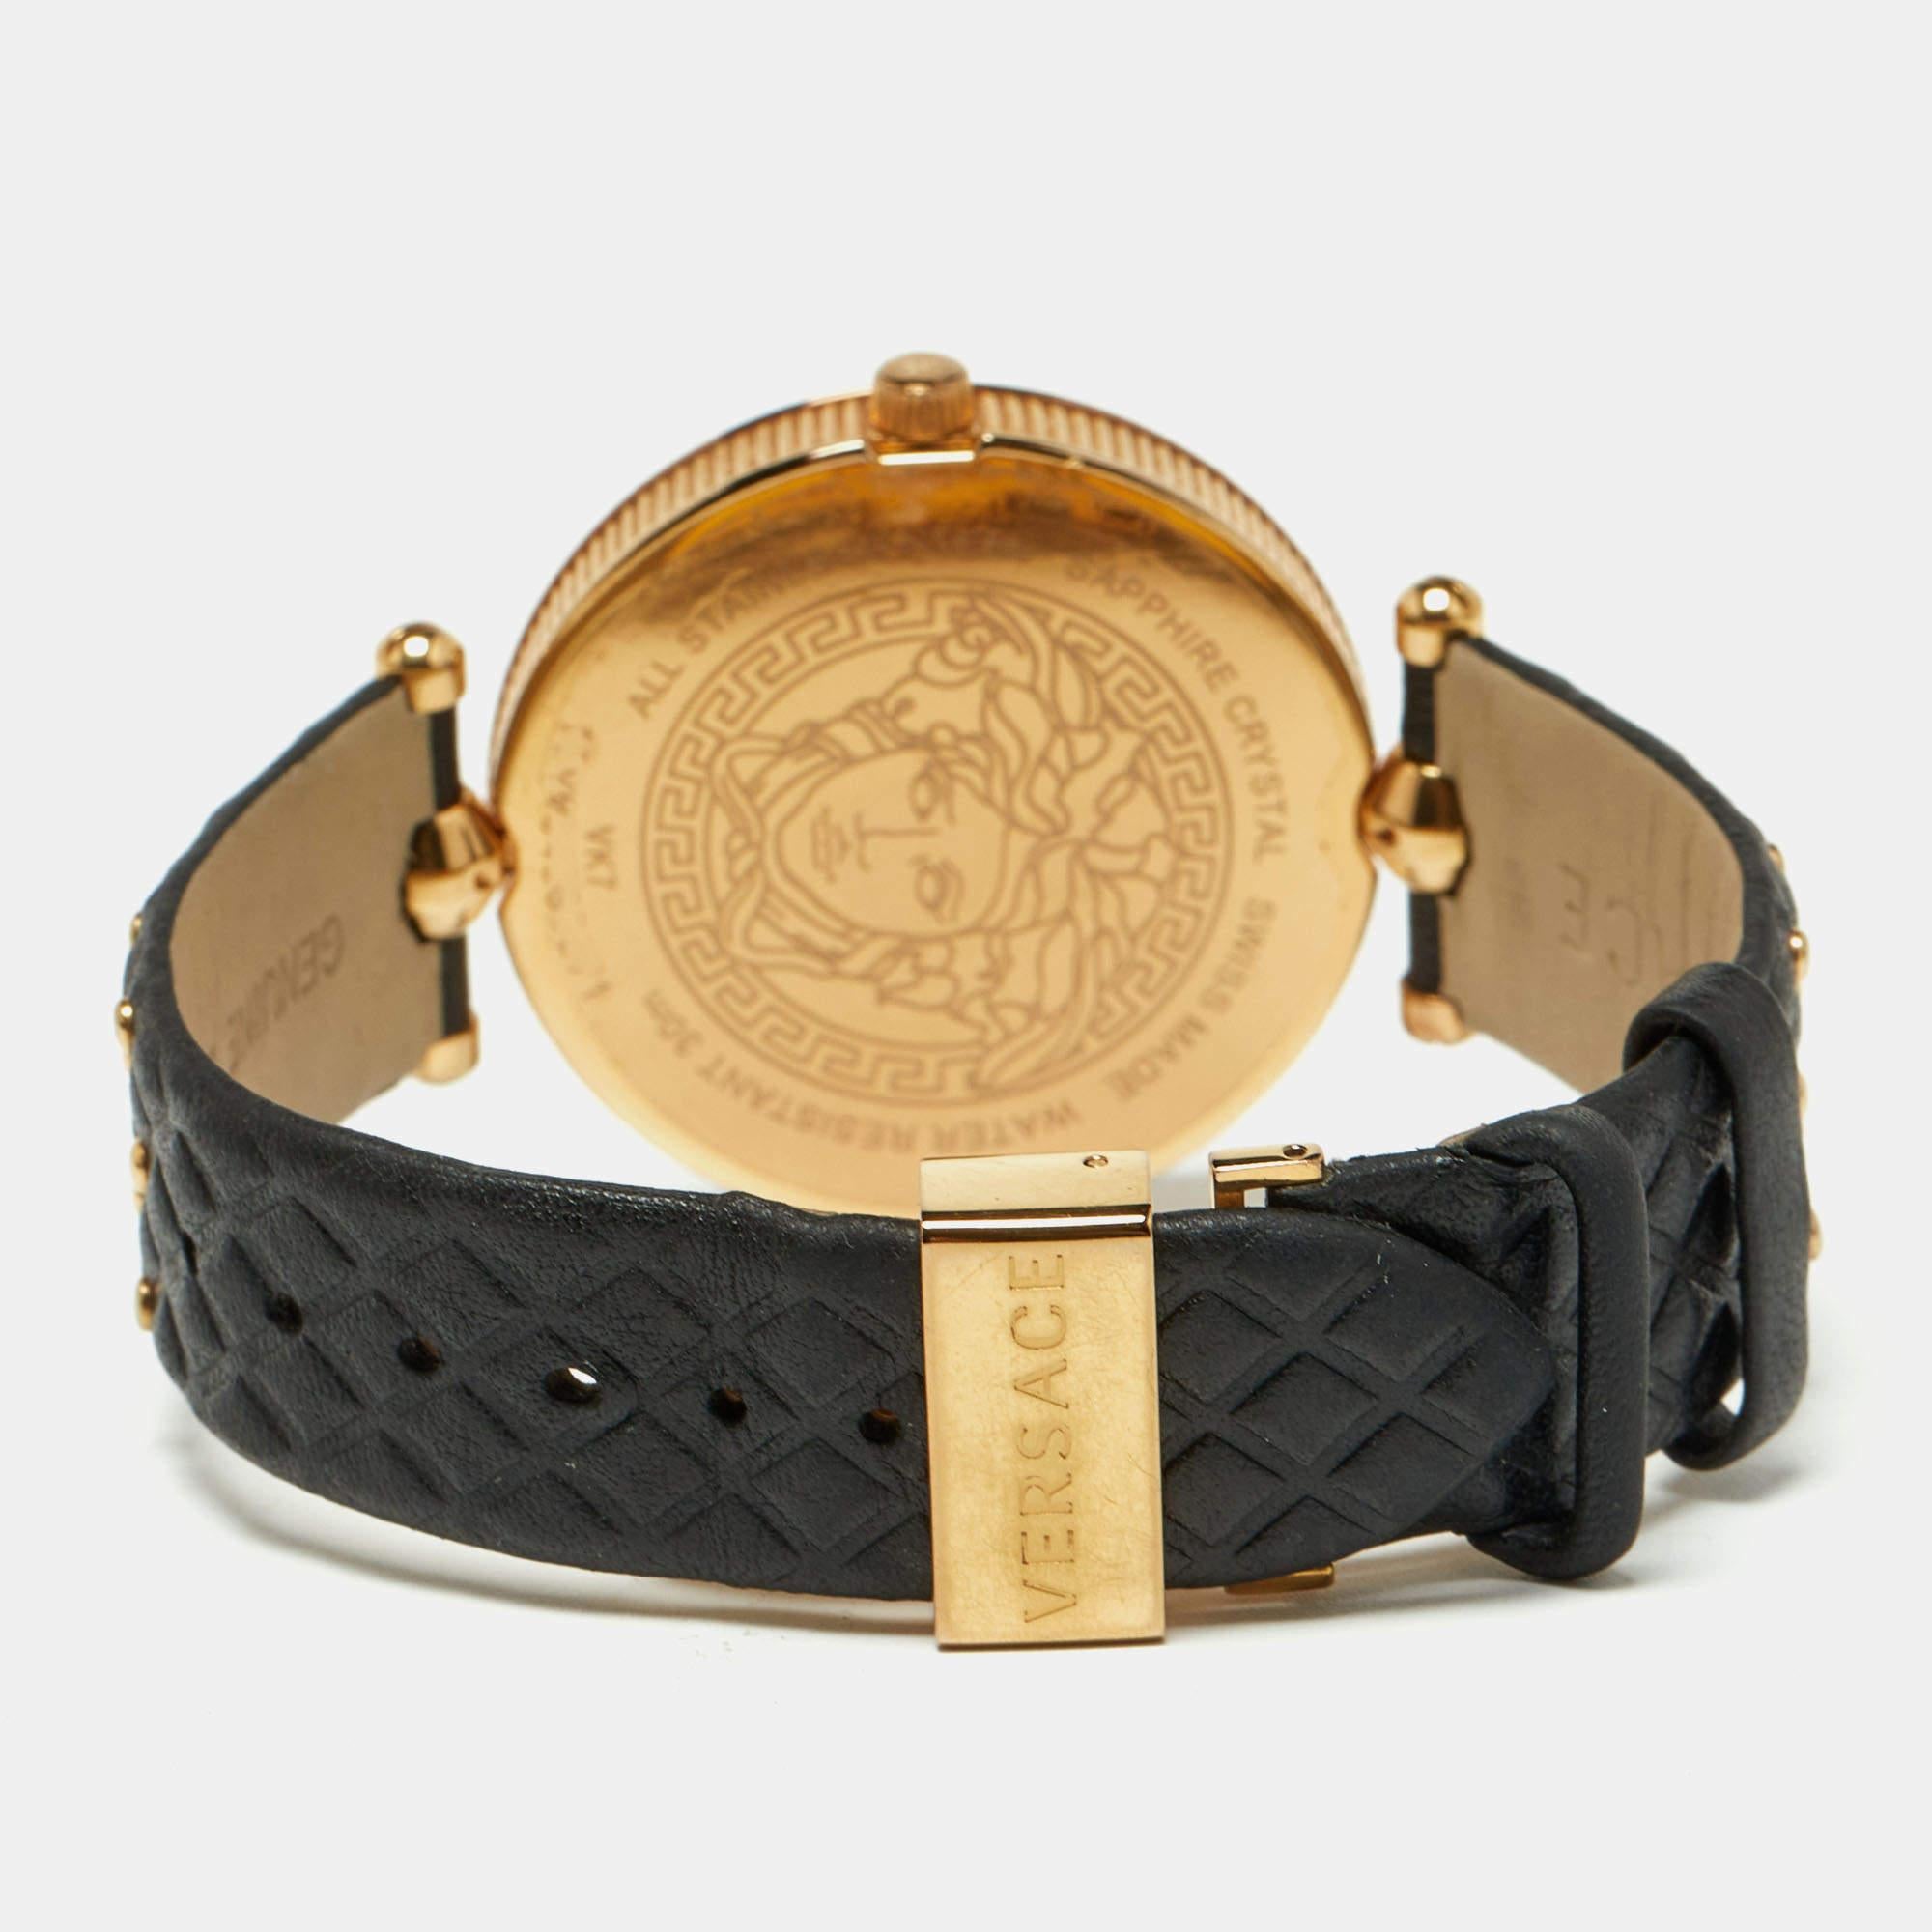 A fine piece of accessory to pair with both your daytime casuals as well as evening looks, this Versace Vanitas wristwatch is a must-have. An exemplar of the label's fine artistry, this watch come made in gold-plated stainless steel and